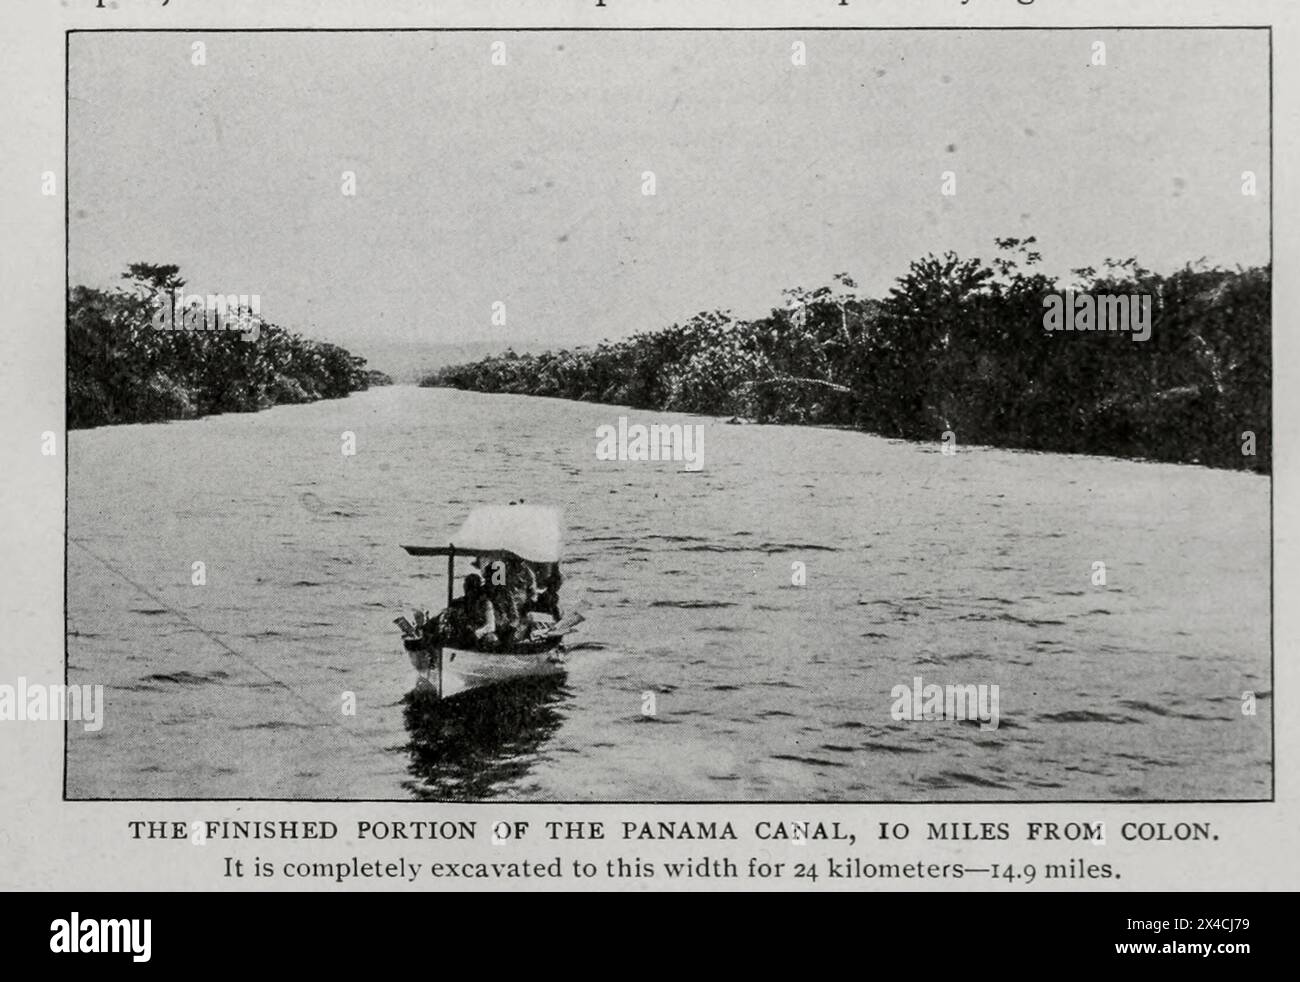 THE FINISHED PORTION OF THE PANAMA CANAL, lO MILES FROM COLON. It is completely excavated to this width for 24 kilometers — 14.9 miles. from the Article THE AMERICAN ISTHMUS AND THE INTEROCEANIC CANAL. By W, Henry Hunter. from The Engineering Magazine Devoted to Industrial Progress Volume XVI October 1898 - March 1899 The Engineering Magazine Co Stock Photo